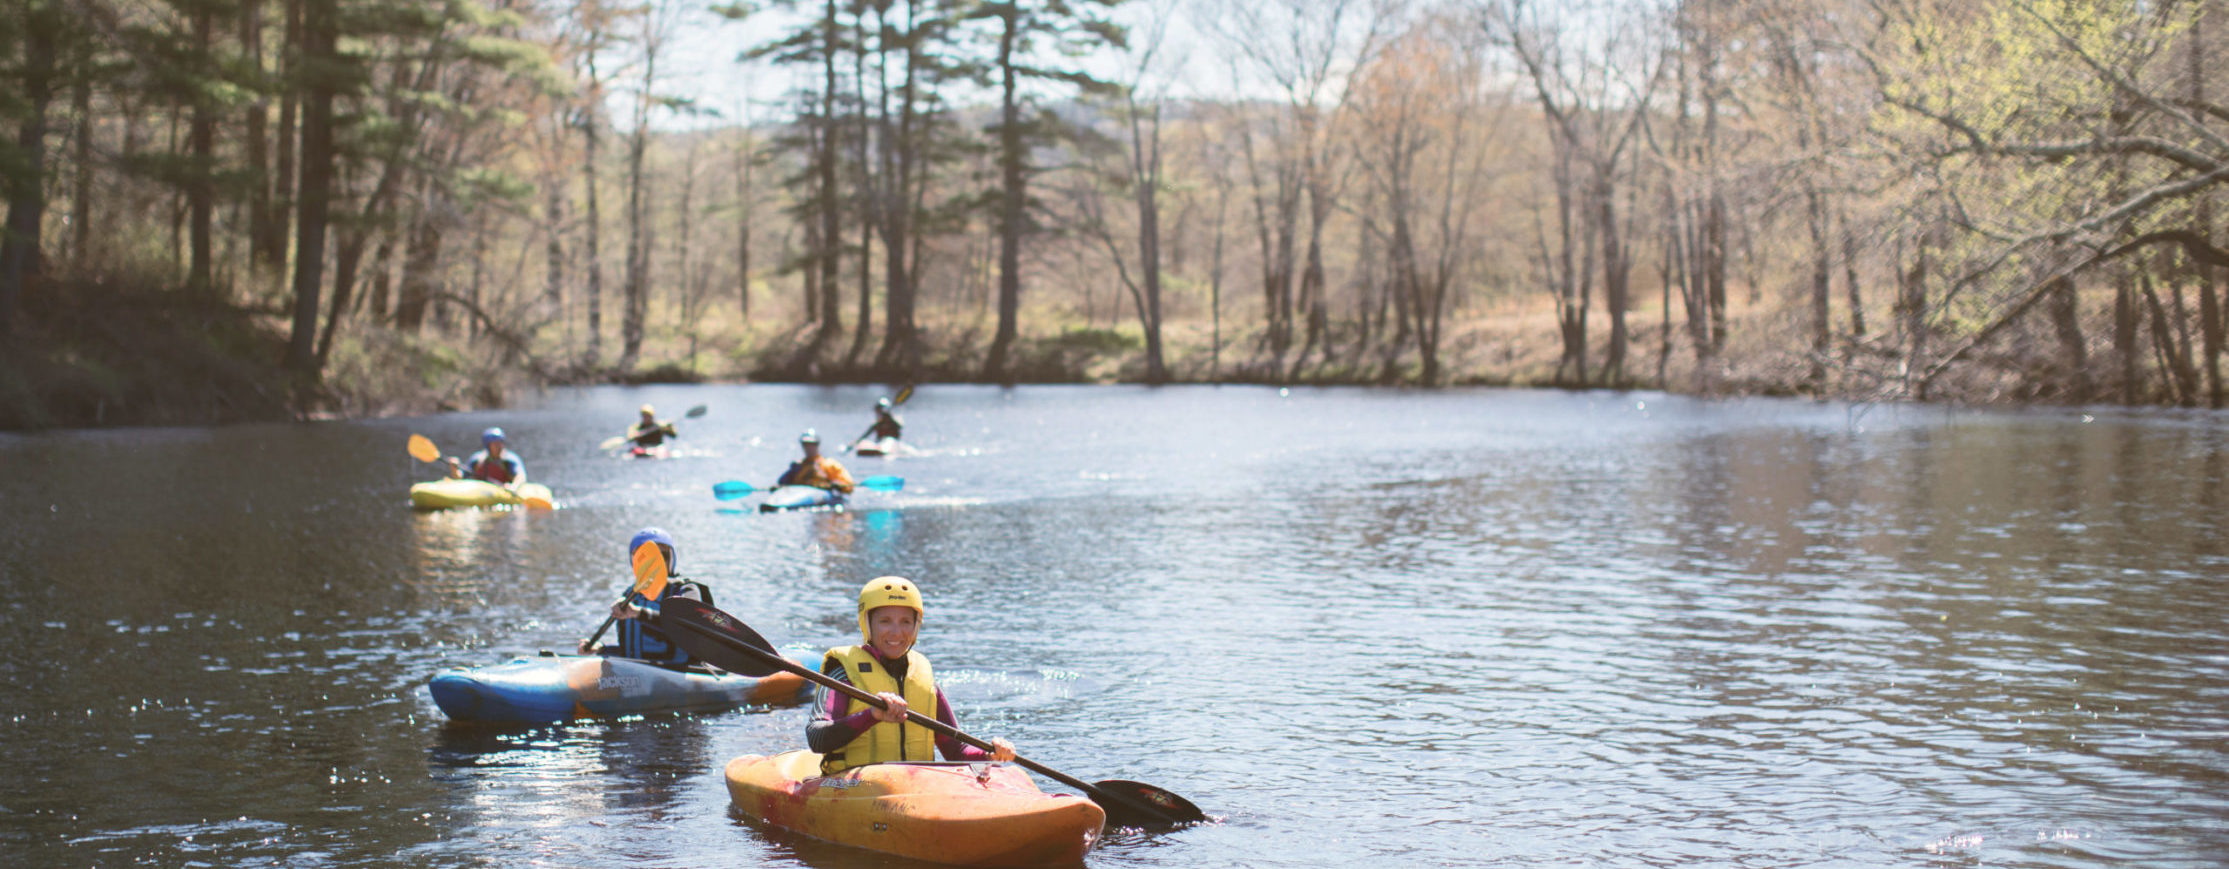 May 4, 2018. Contoocook River, Henniker, New Hampshire-- A volunteer-led whitewater kayaking class supported by the AMC. Photo by Paula Champagne.